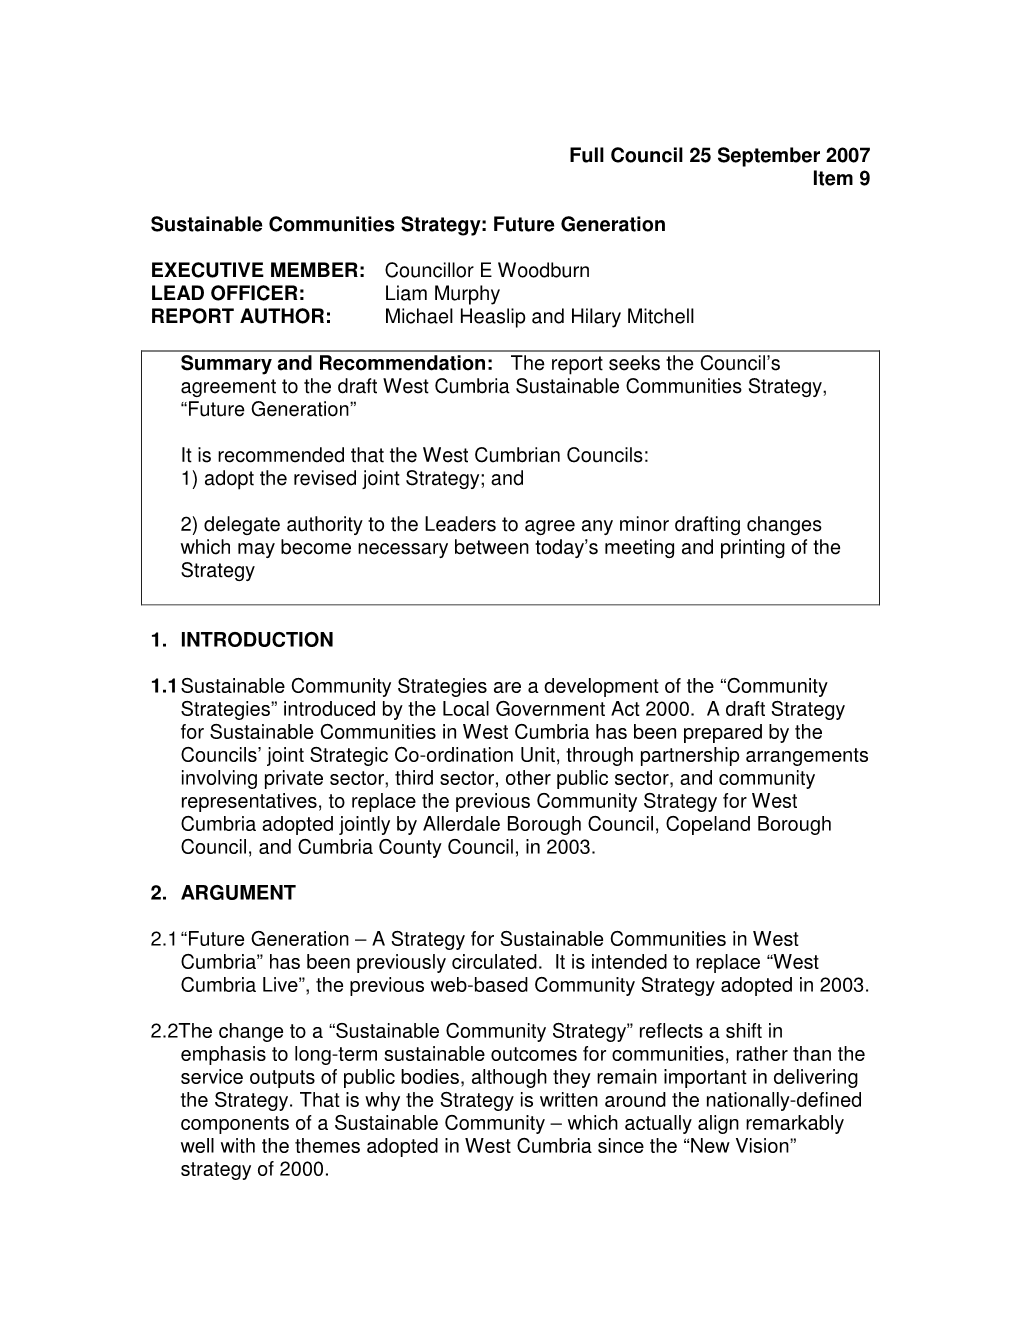 Full Council 25 September 2007 Item 9 Sustainable Communities Strategy